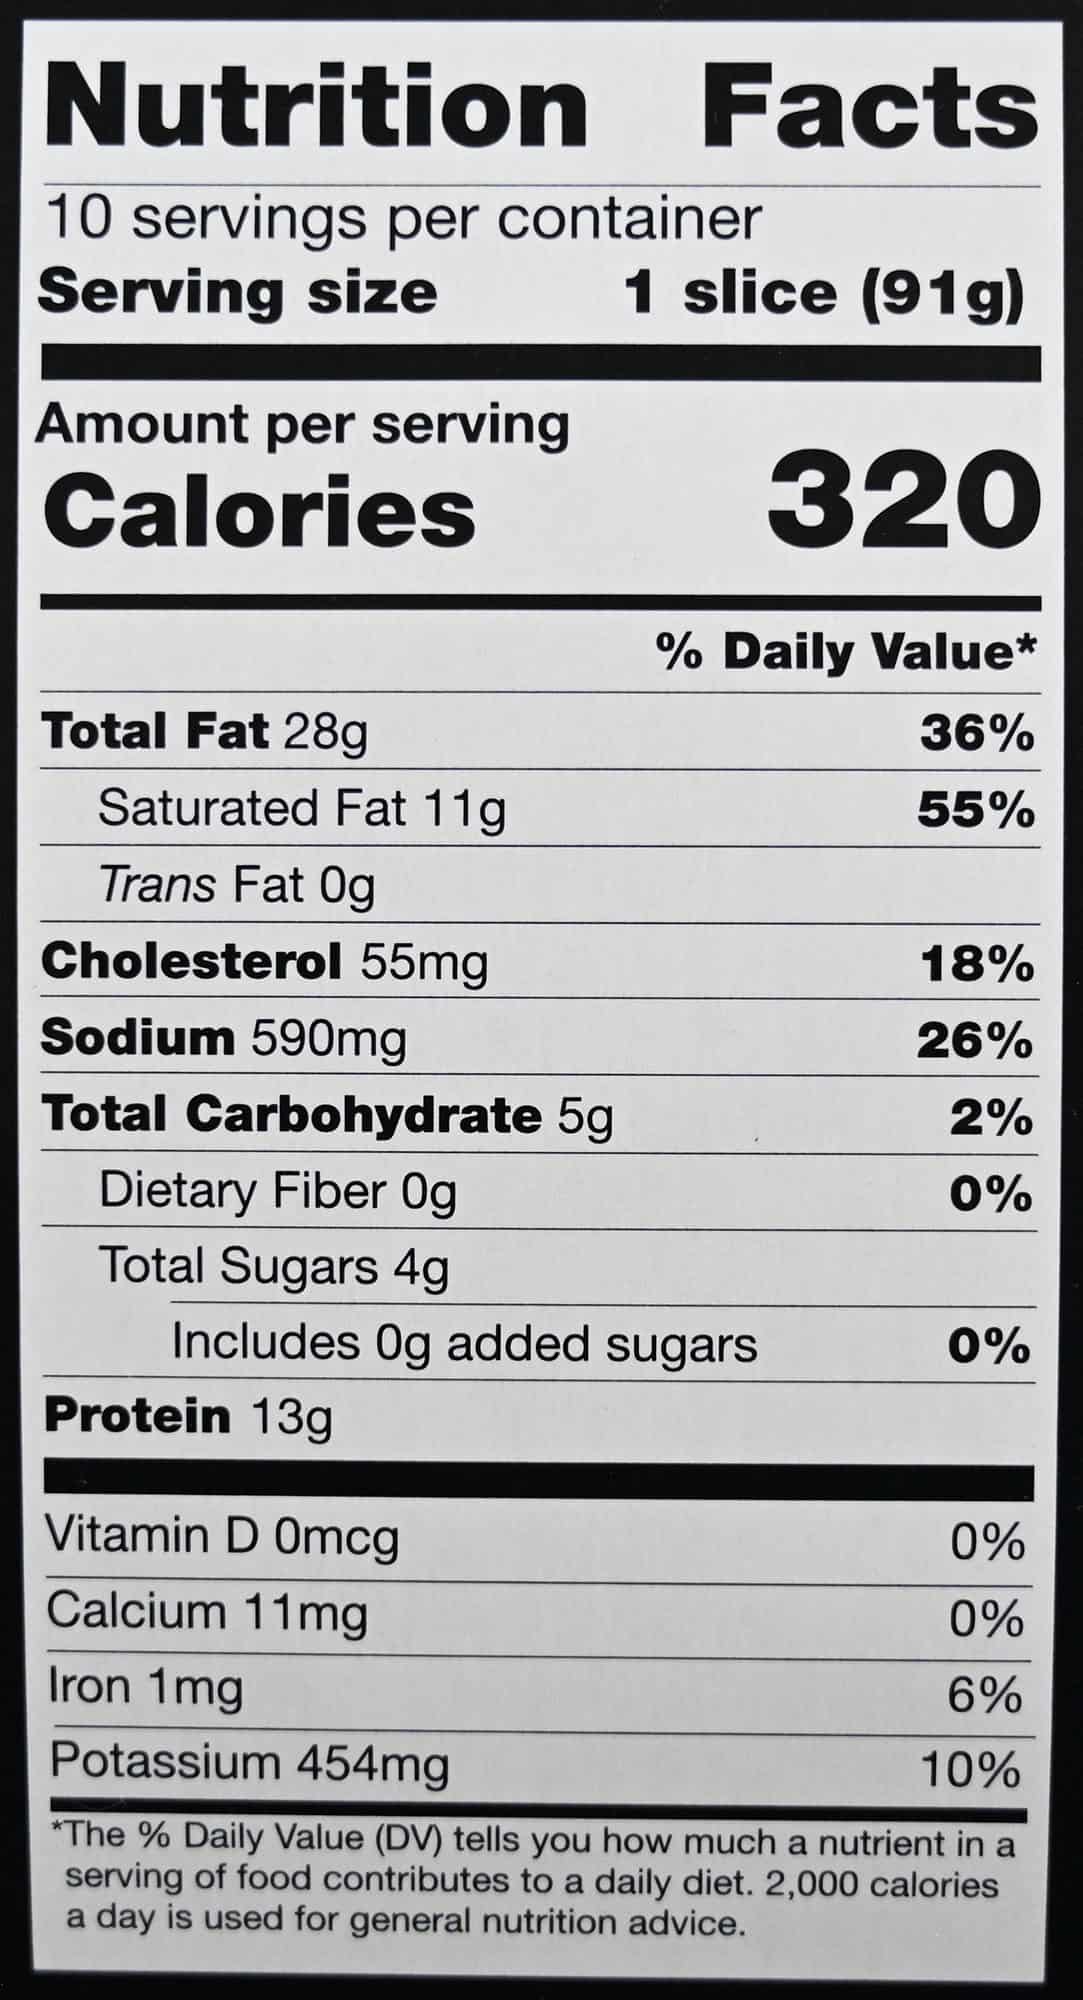 Image of the nutrition facts for the pork belly from the back of the box.